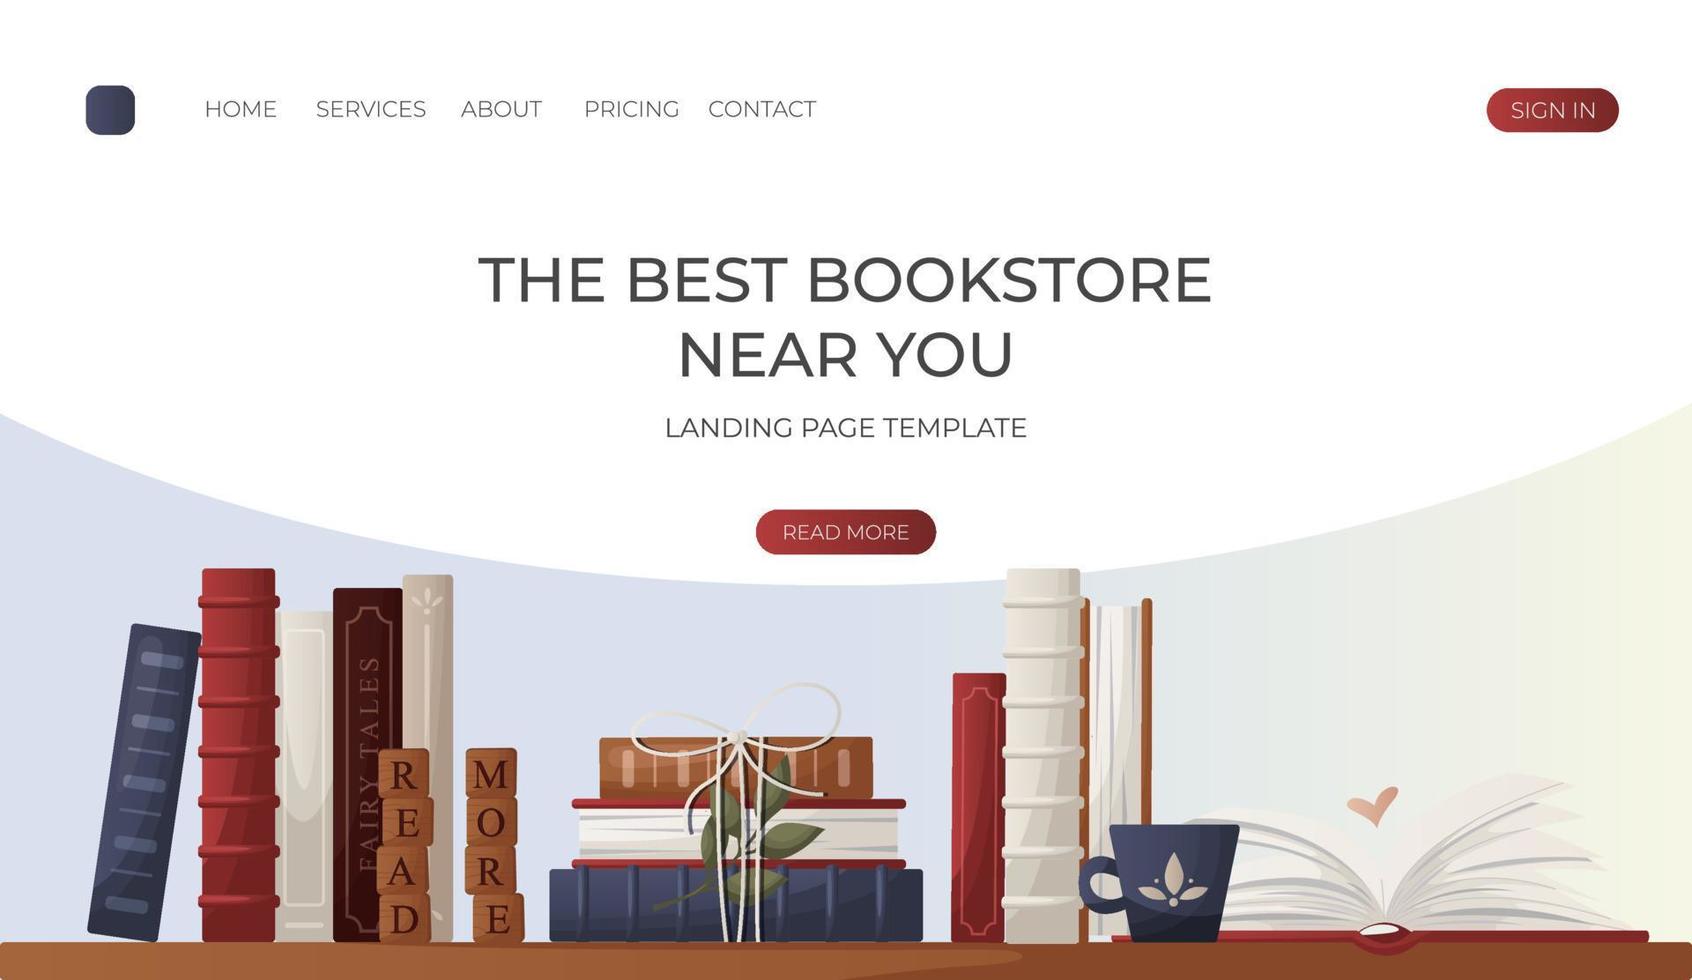 Landing page with reading bookshelve with stack of books with cup of tea, open book, wooden letter tiles. Bookstore, bookshop, library, book lover, bibliophile, education. For banner, website vector